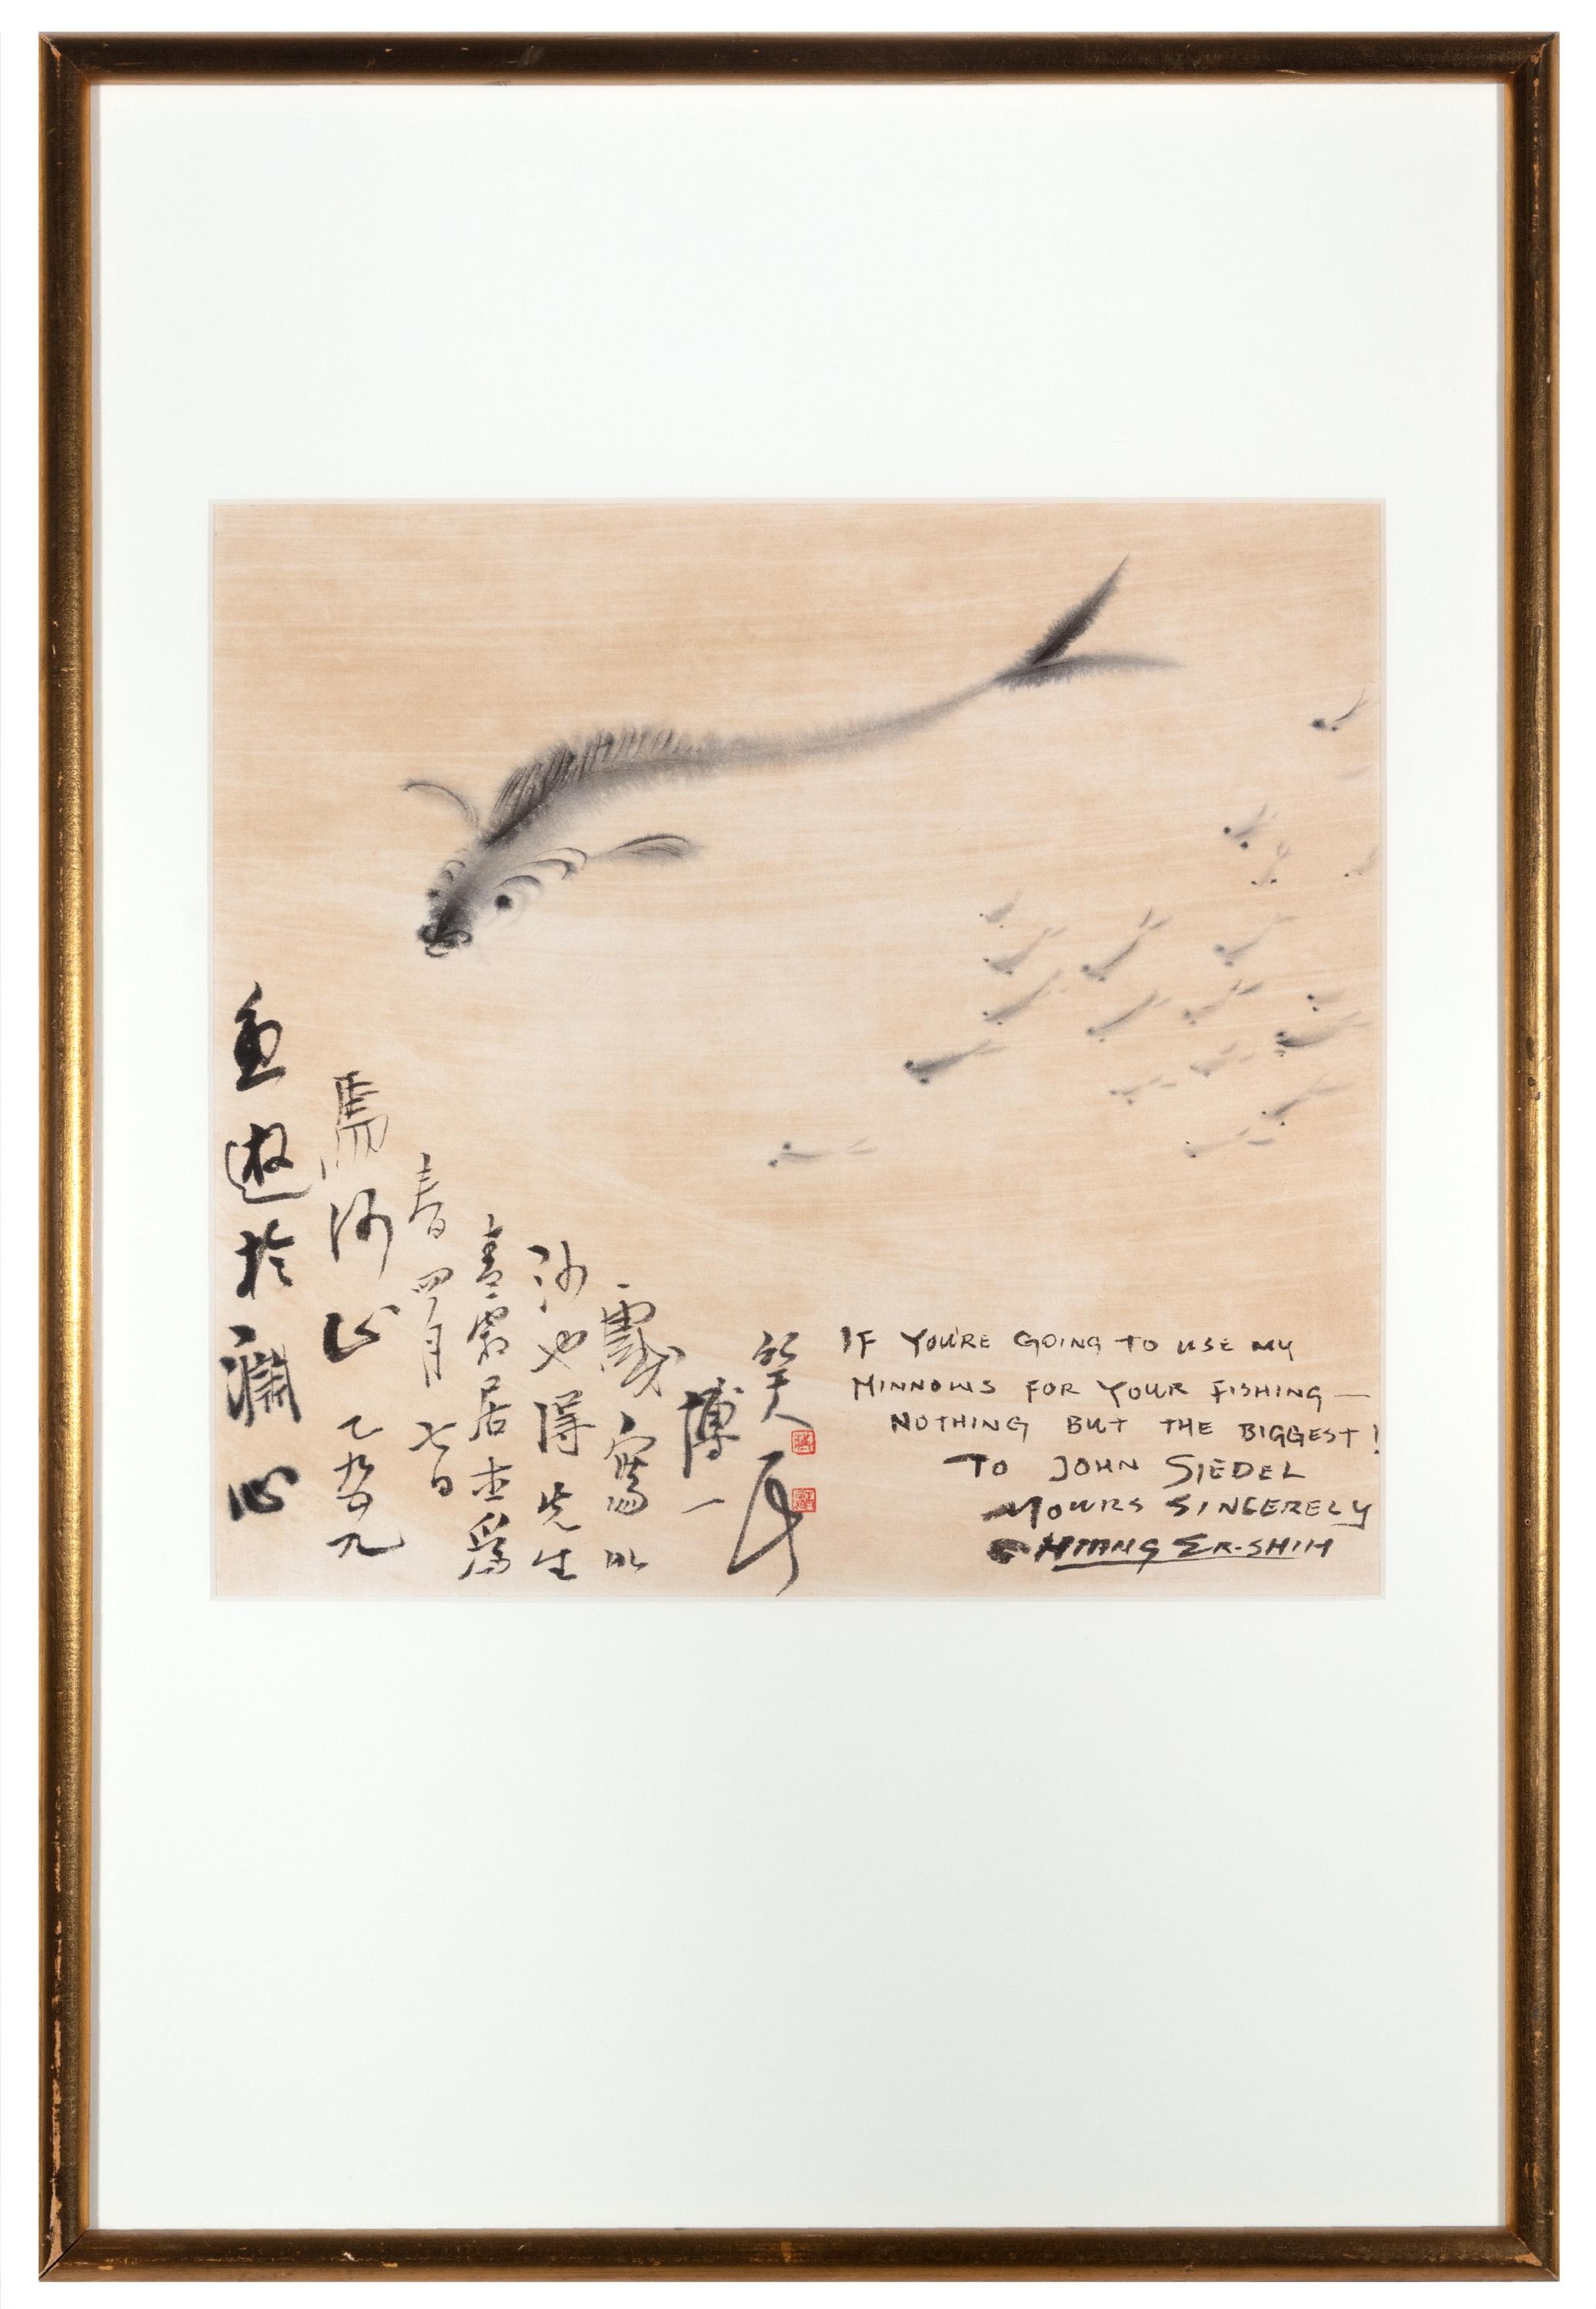 Chiang Er-shih Animal Art - "If You're Going to Use My Minnows for Your Fishing, Nothing but the Biggest!"